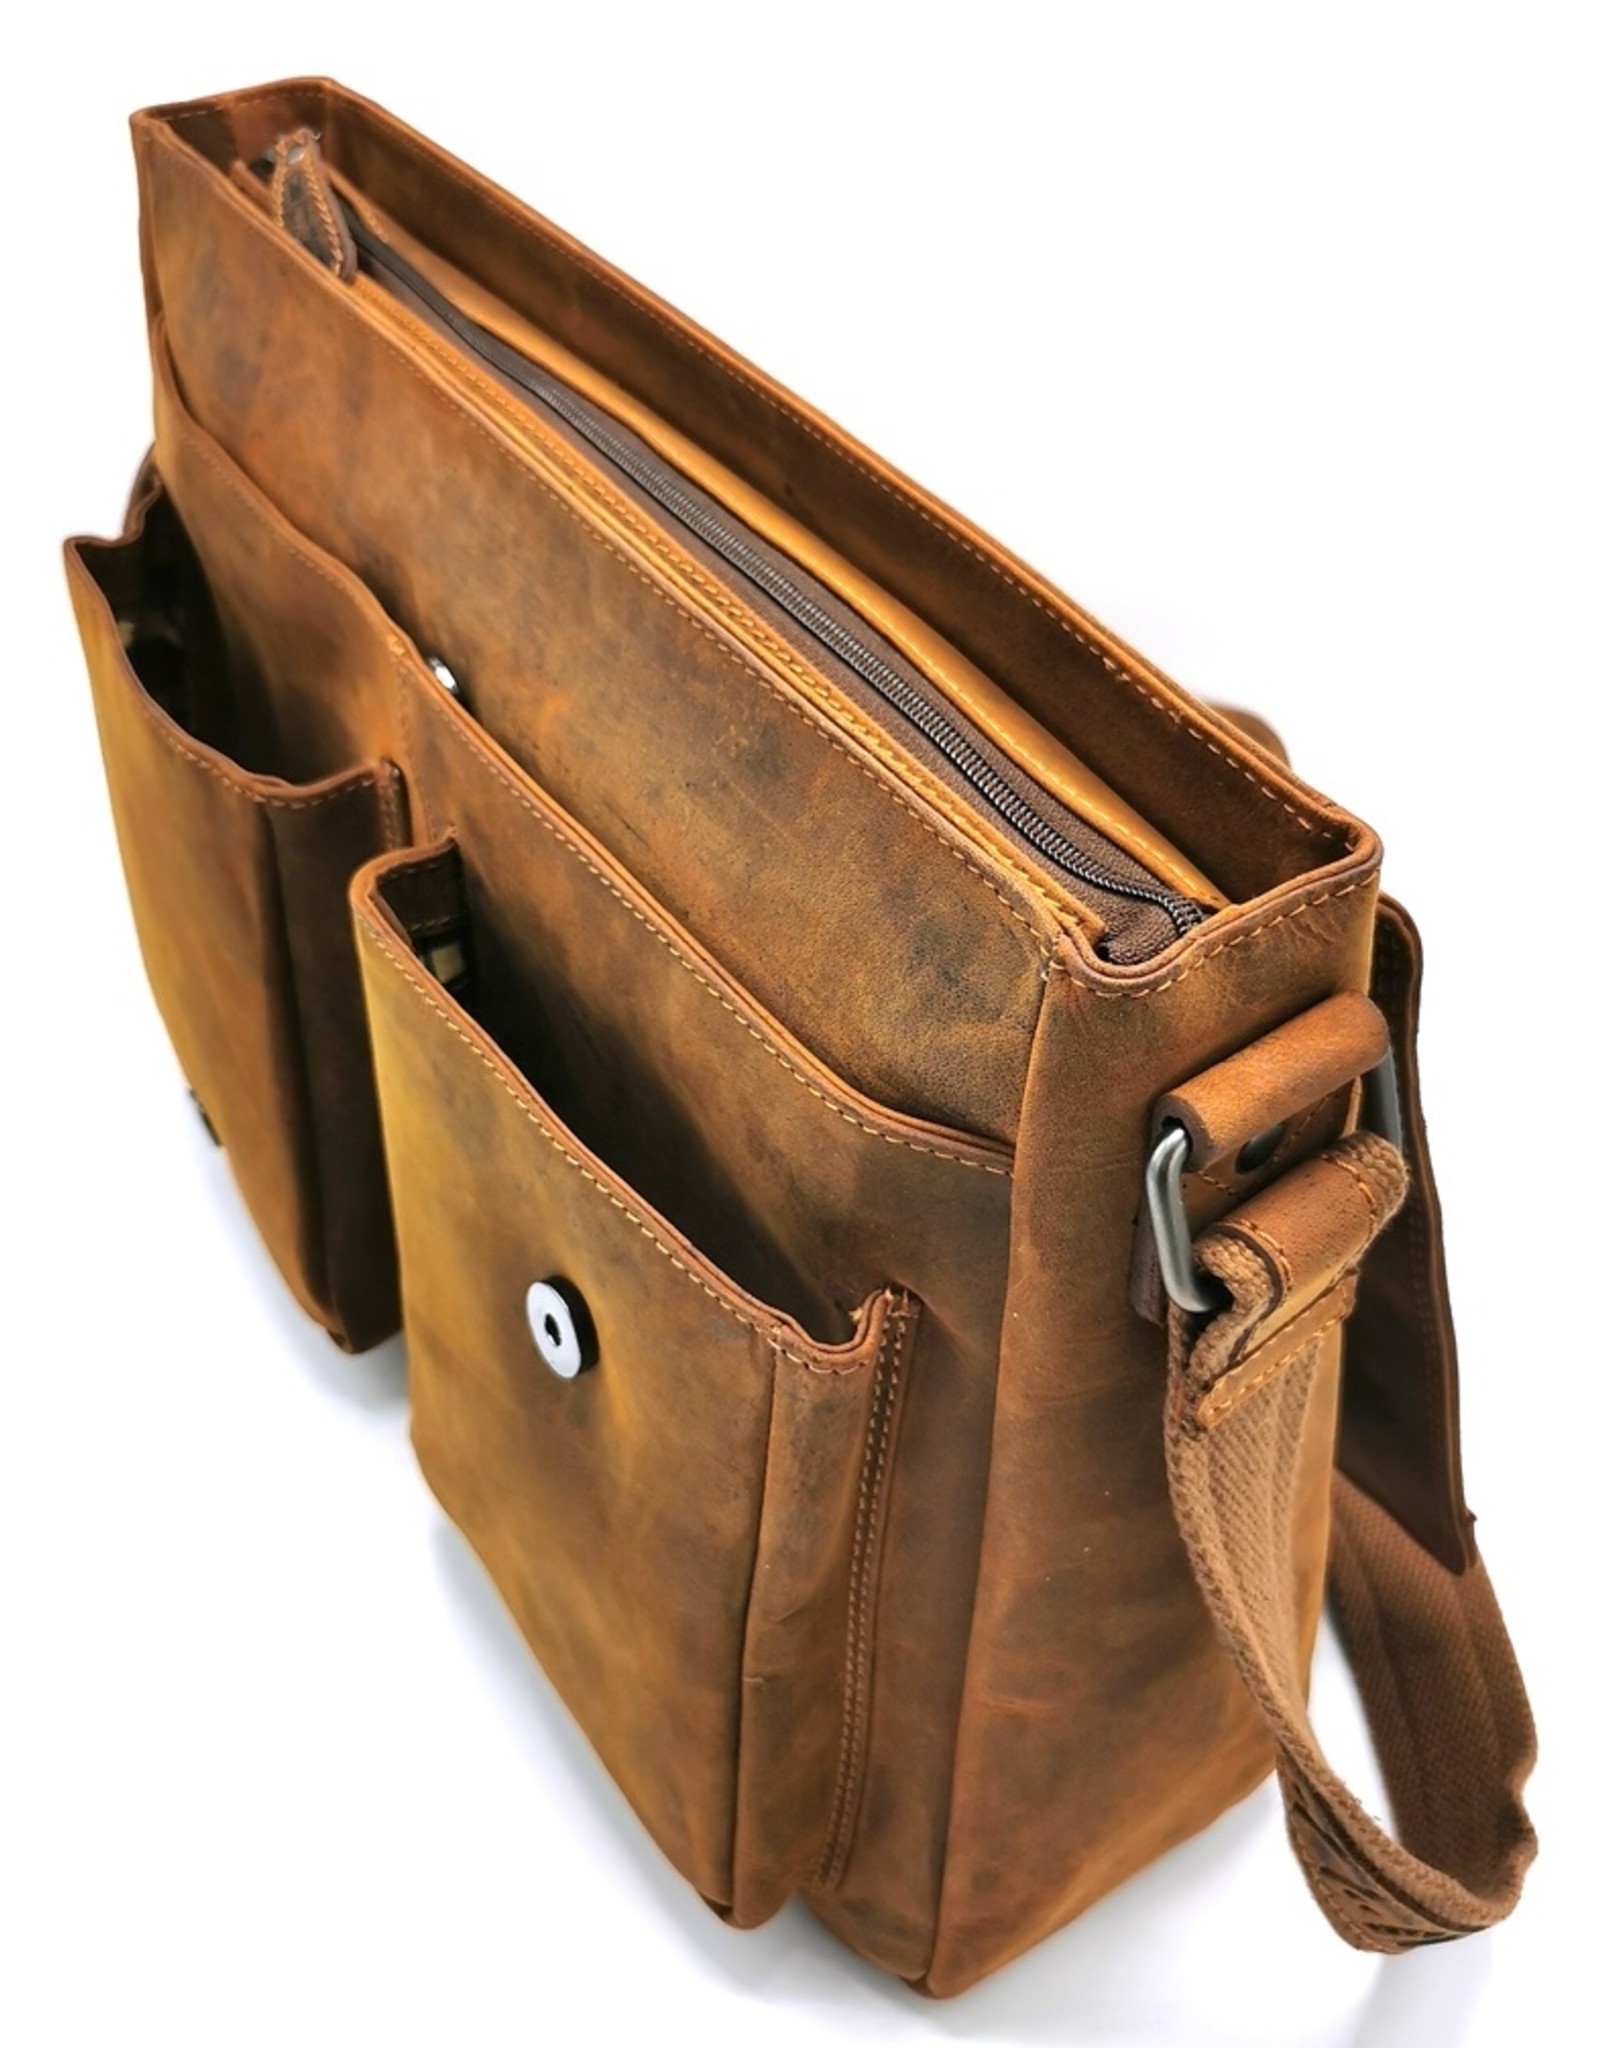 HillBurry Leather bags - HillBurry Leather Laptop bag-workbag with holster cover